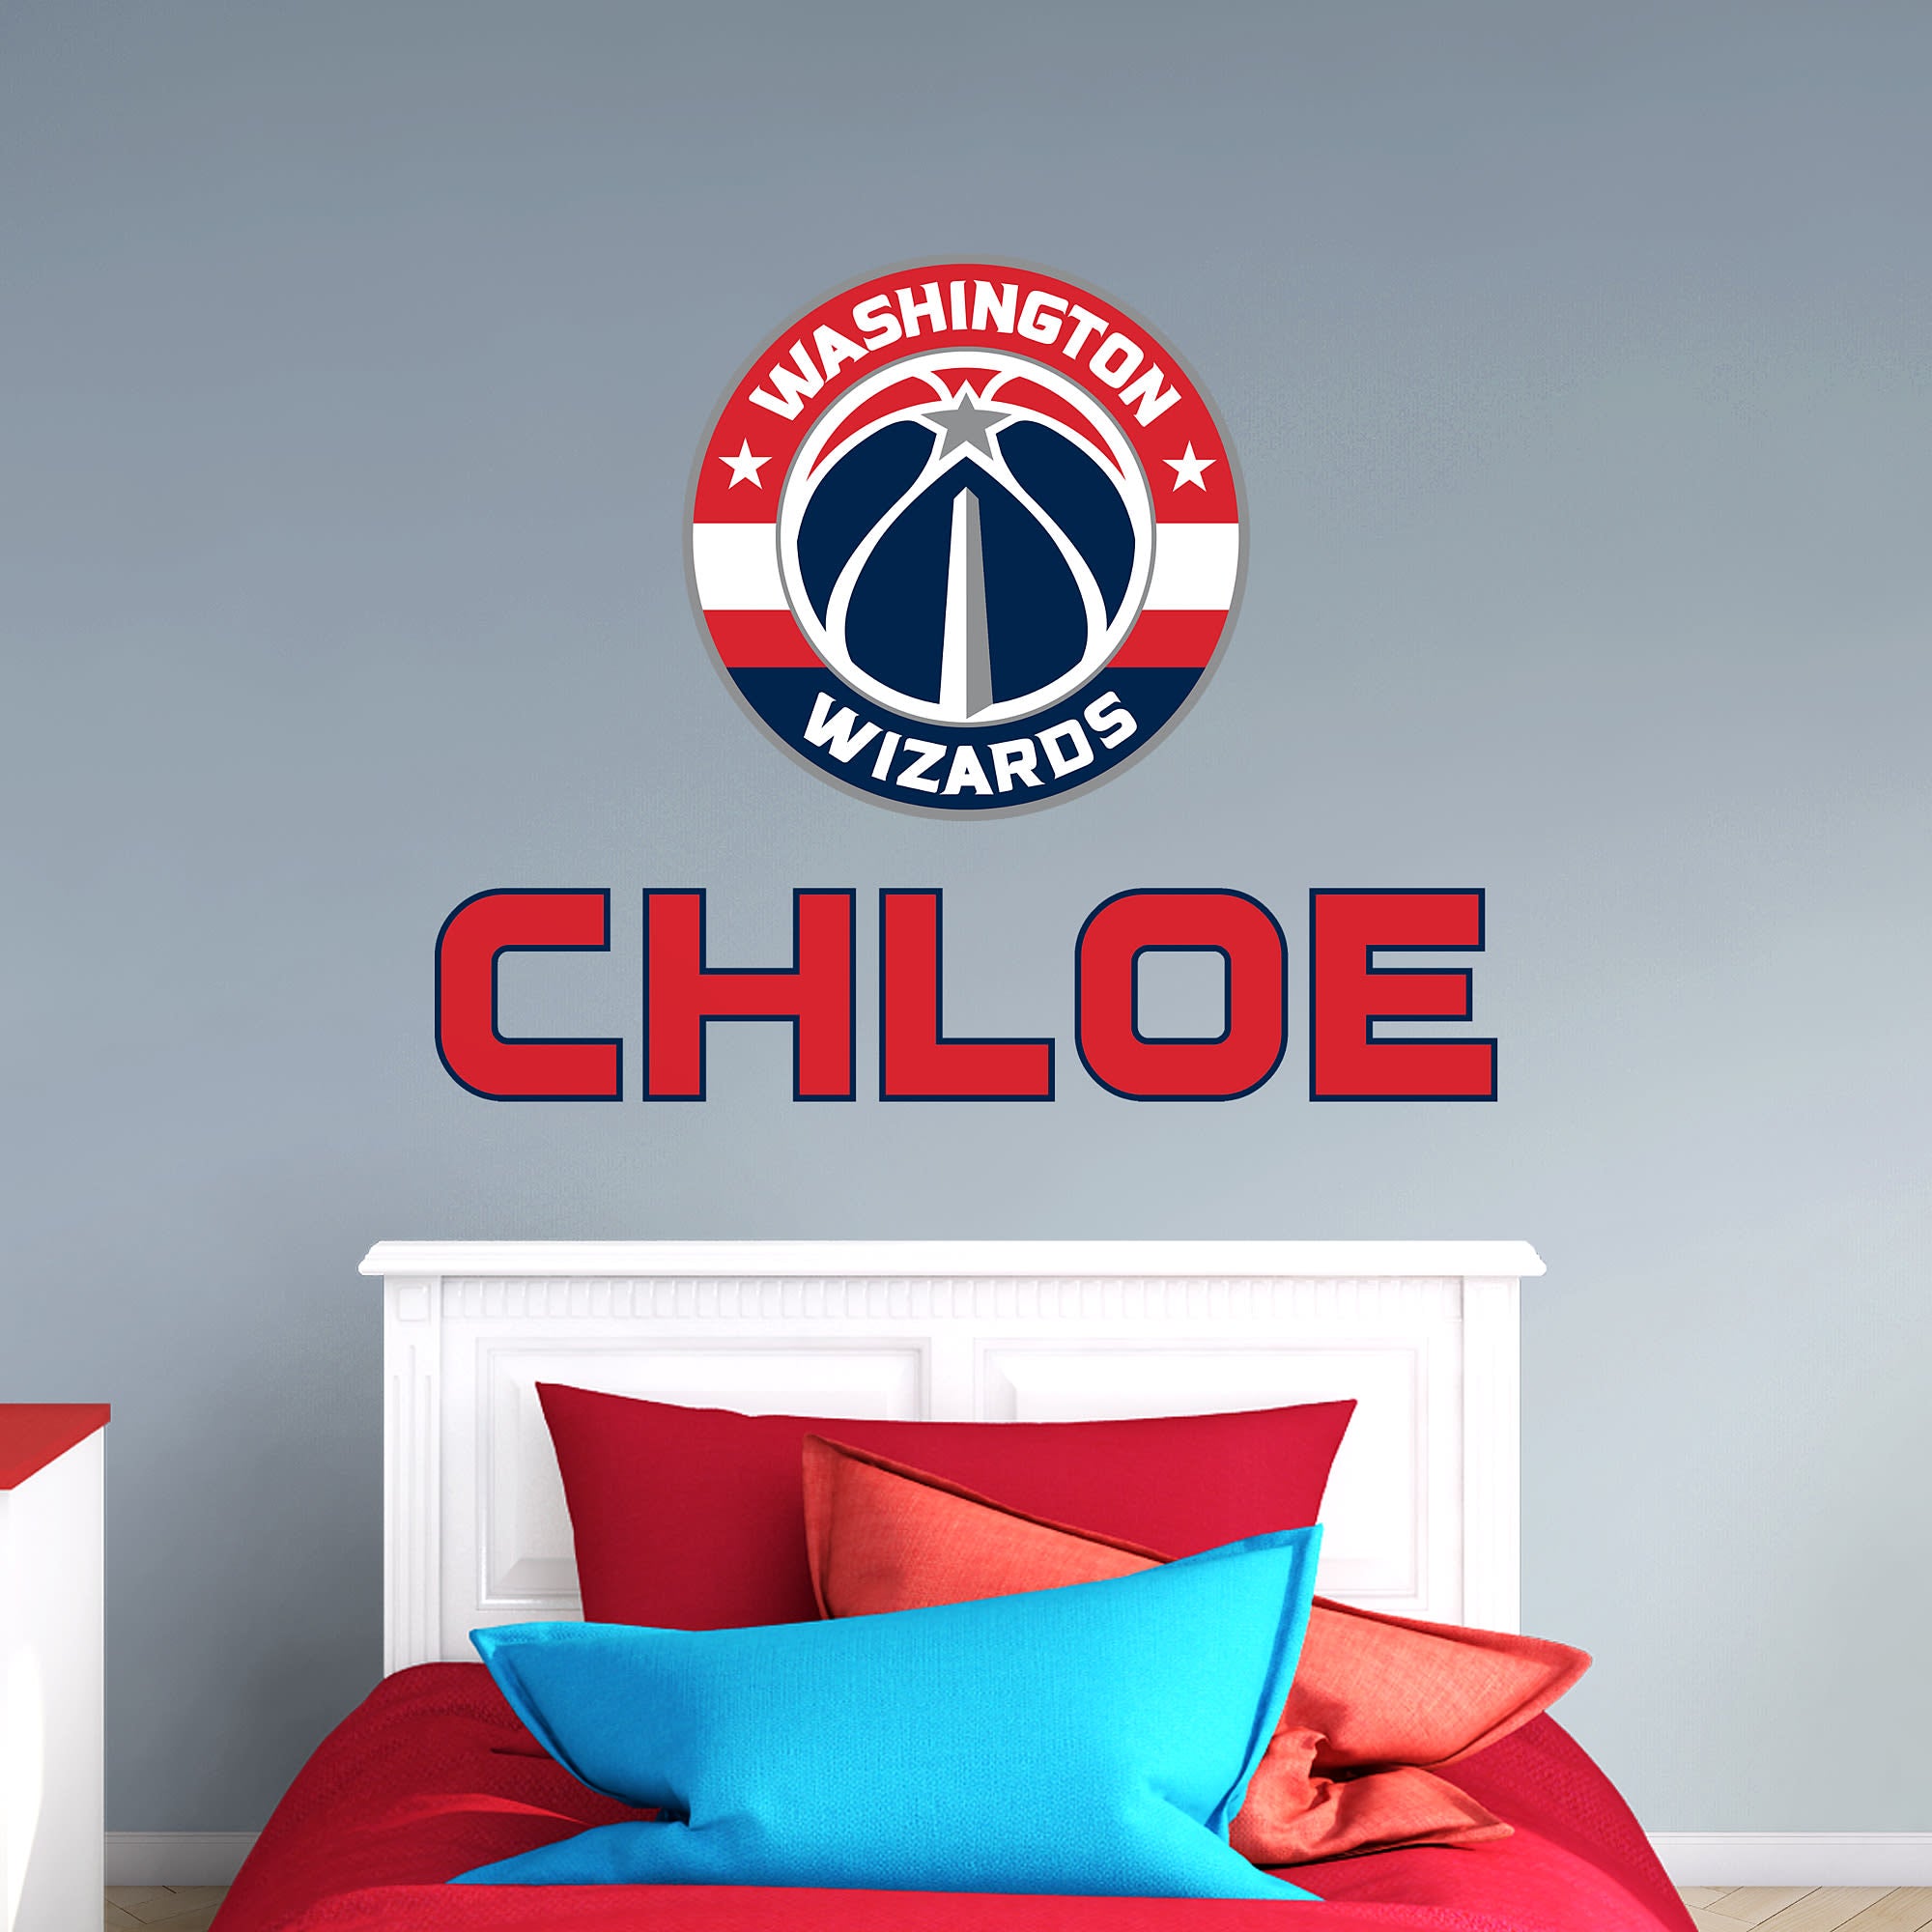 Washington Wizards: Stacked Personalized Name - Officially Licensed NBA Transfer Decal in Red (52"W x 39.5"H) by Fathead | Vinyl